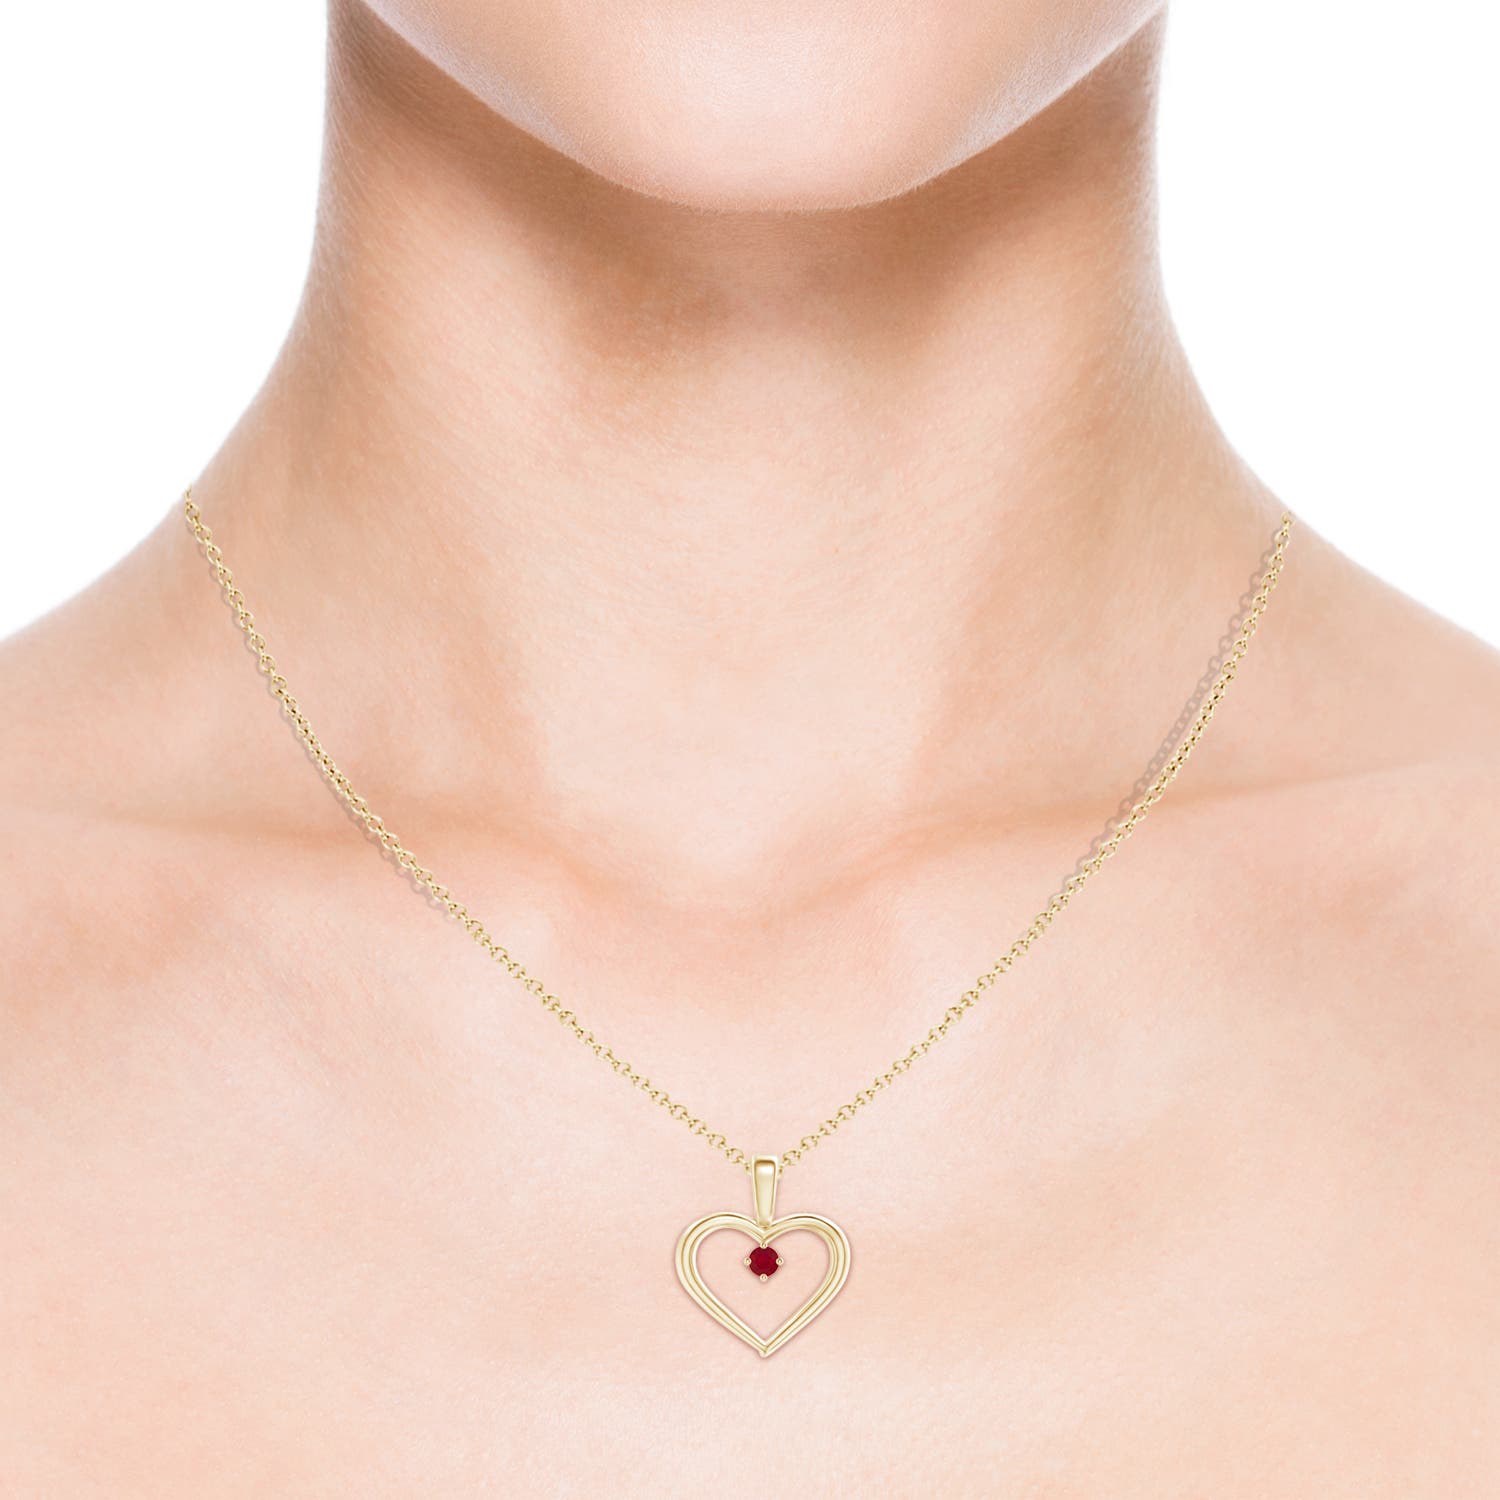 AA - Ruby / 0.09 CT / 14 KT Yellow Gold